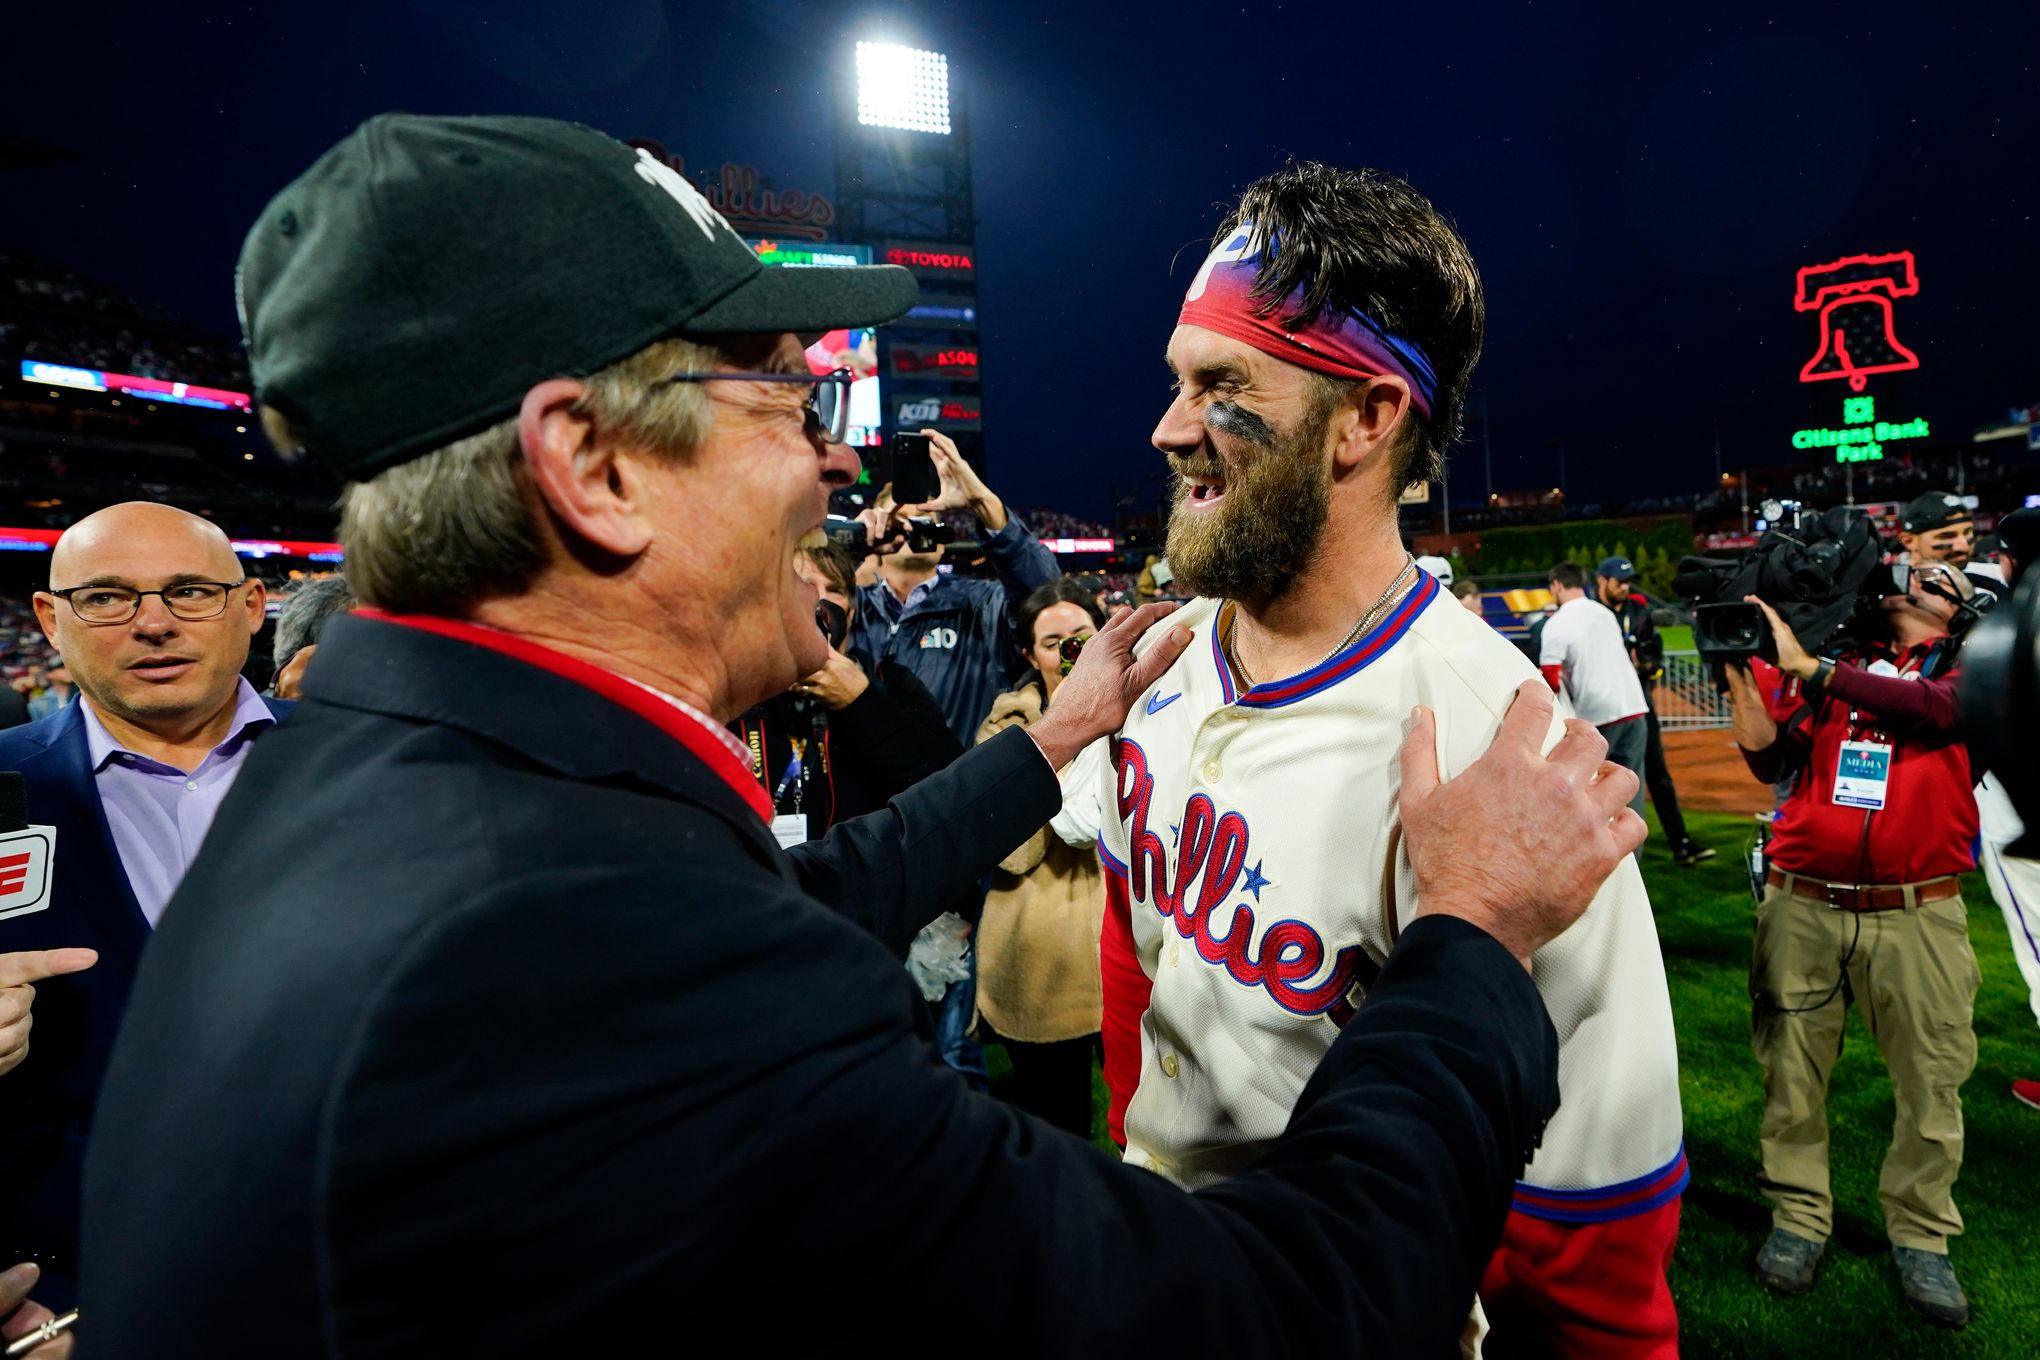 NLCS MVP Bryce Harper predicts World Series victory: 'We're gonna